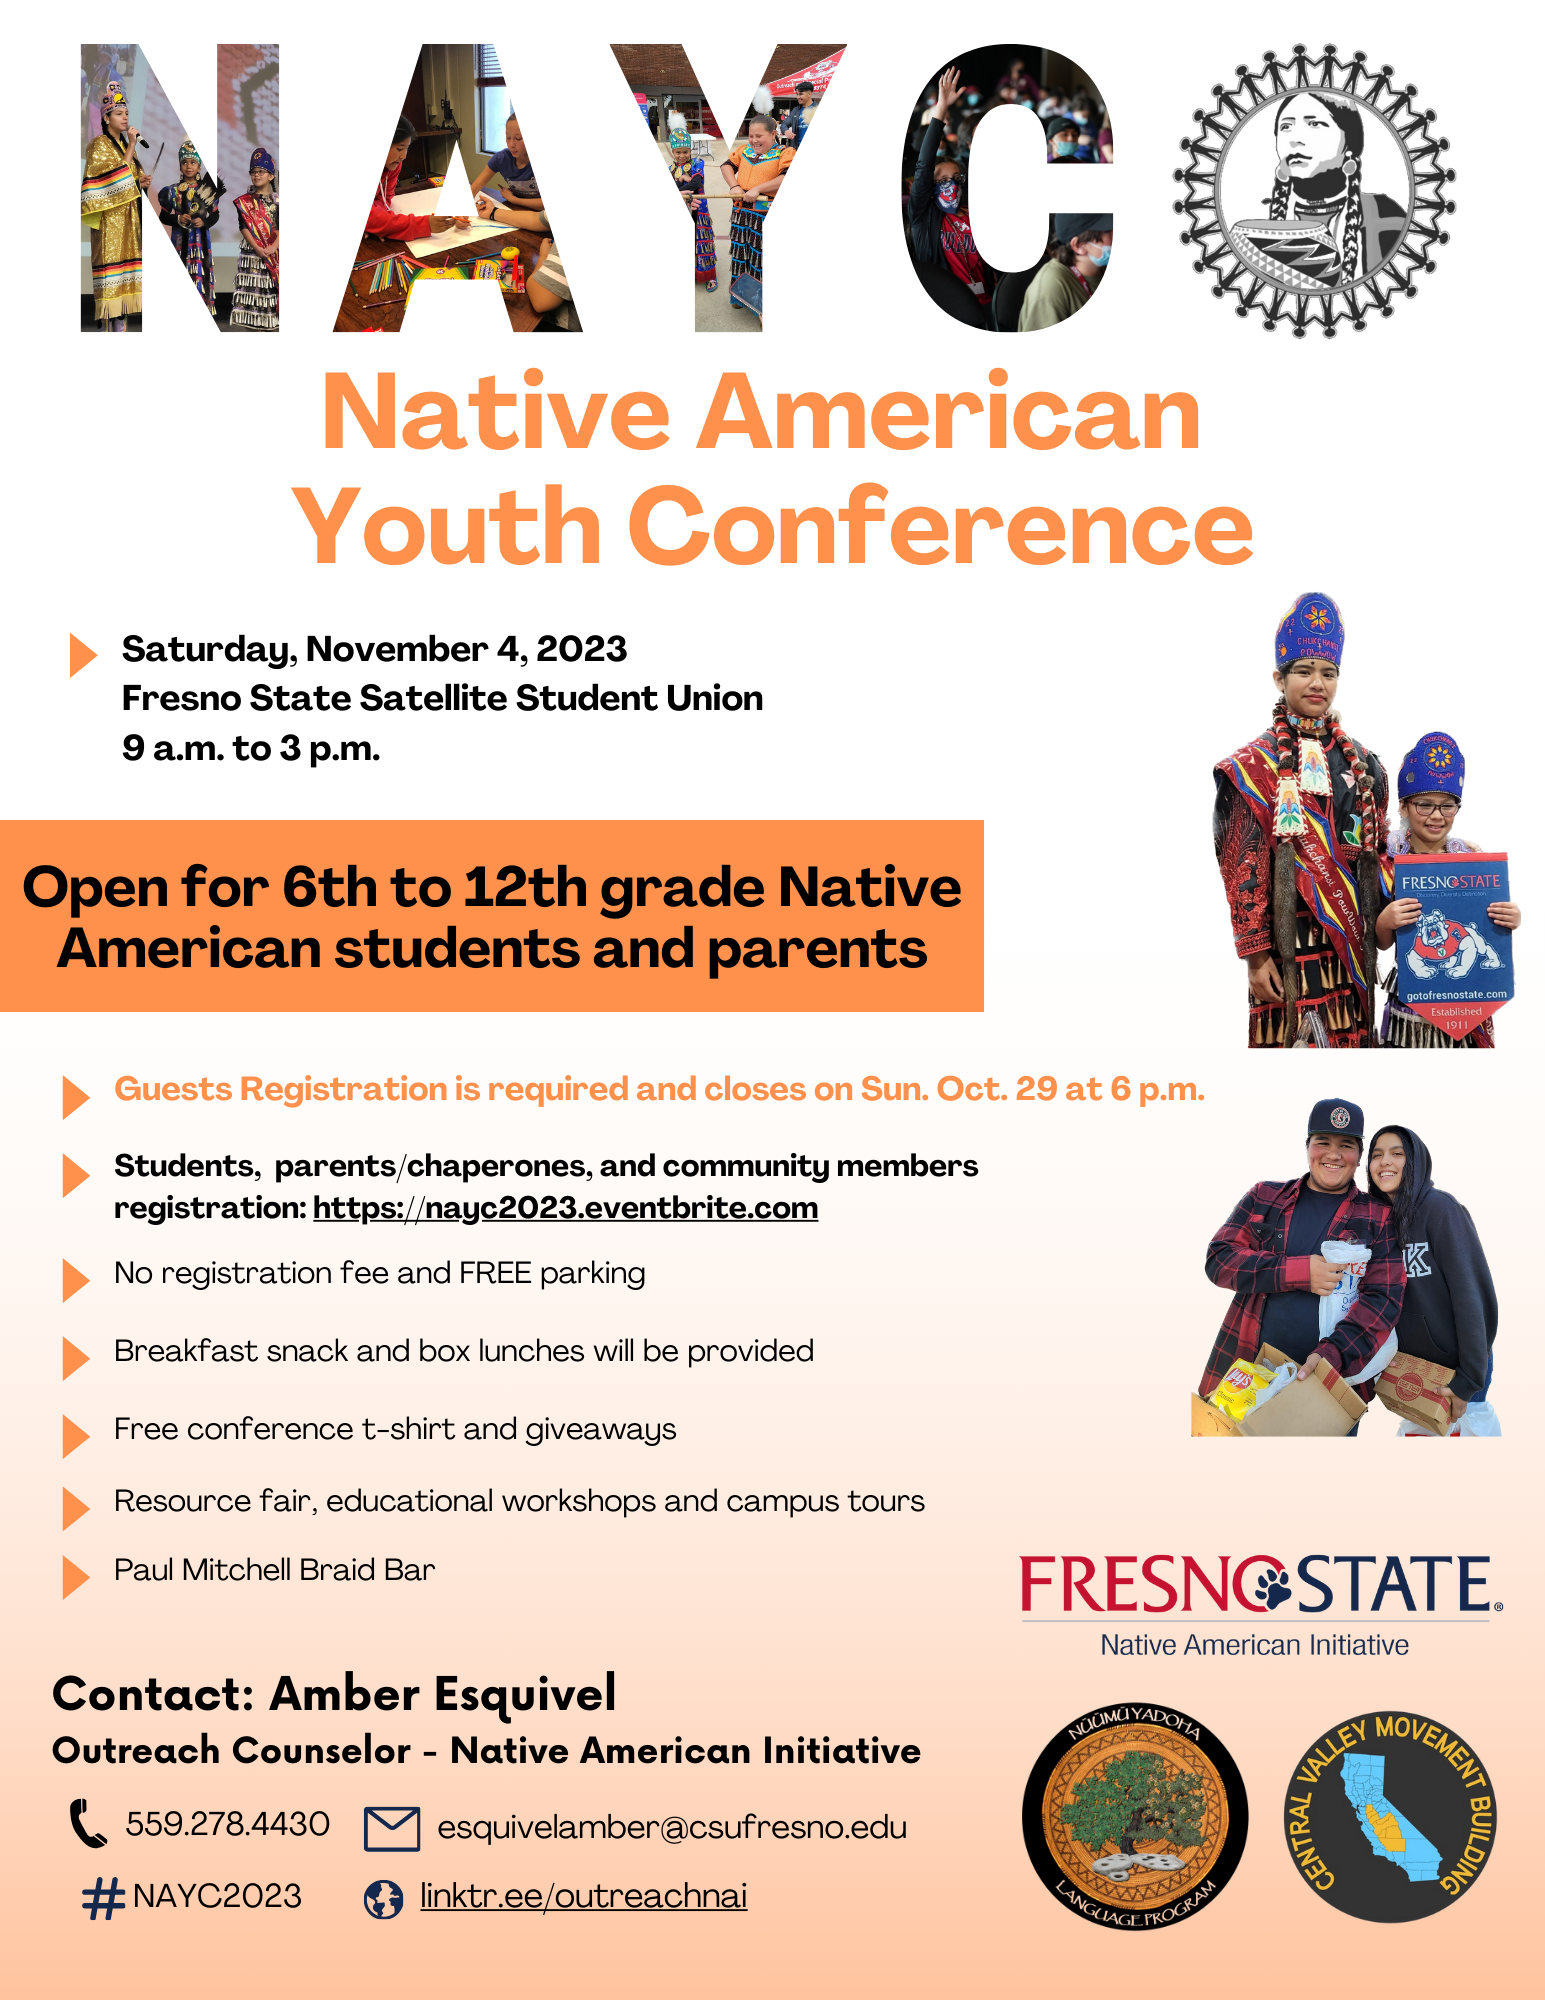 save the date flyer for the native american youth conference on saturday, november 4, 2023 in the satellite student union from 9 a.m. to 3 p.m.